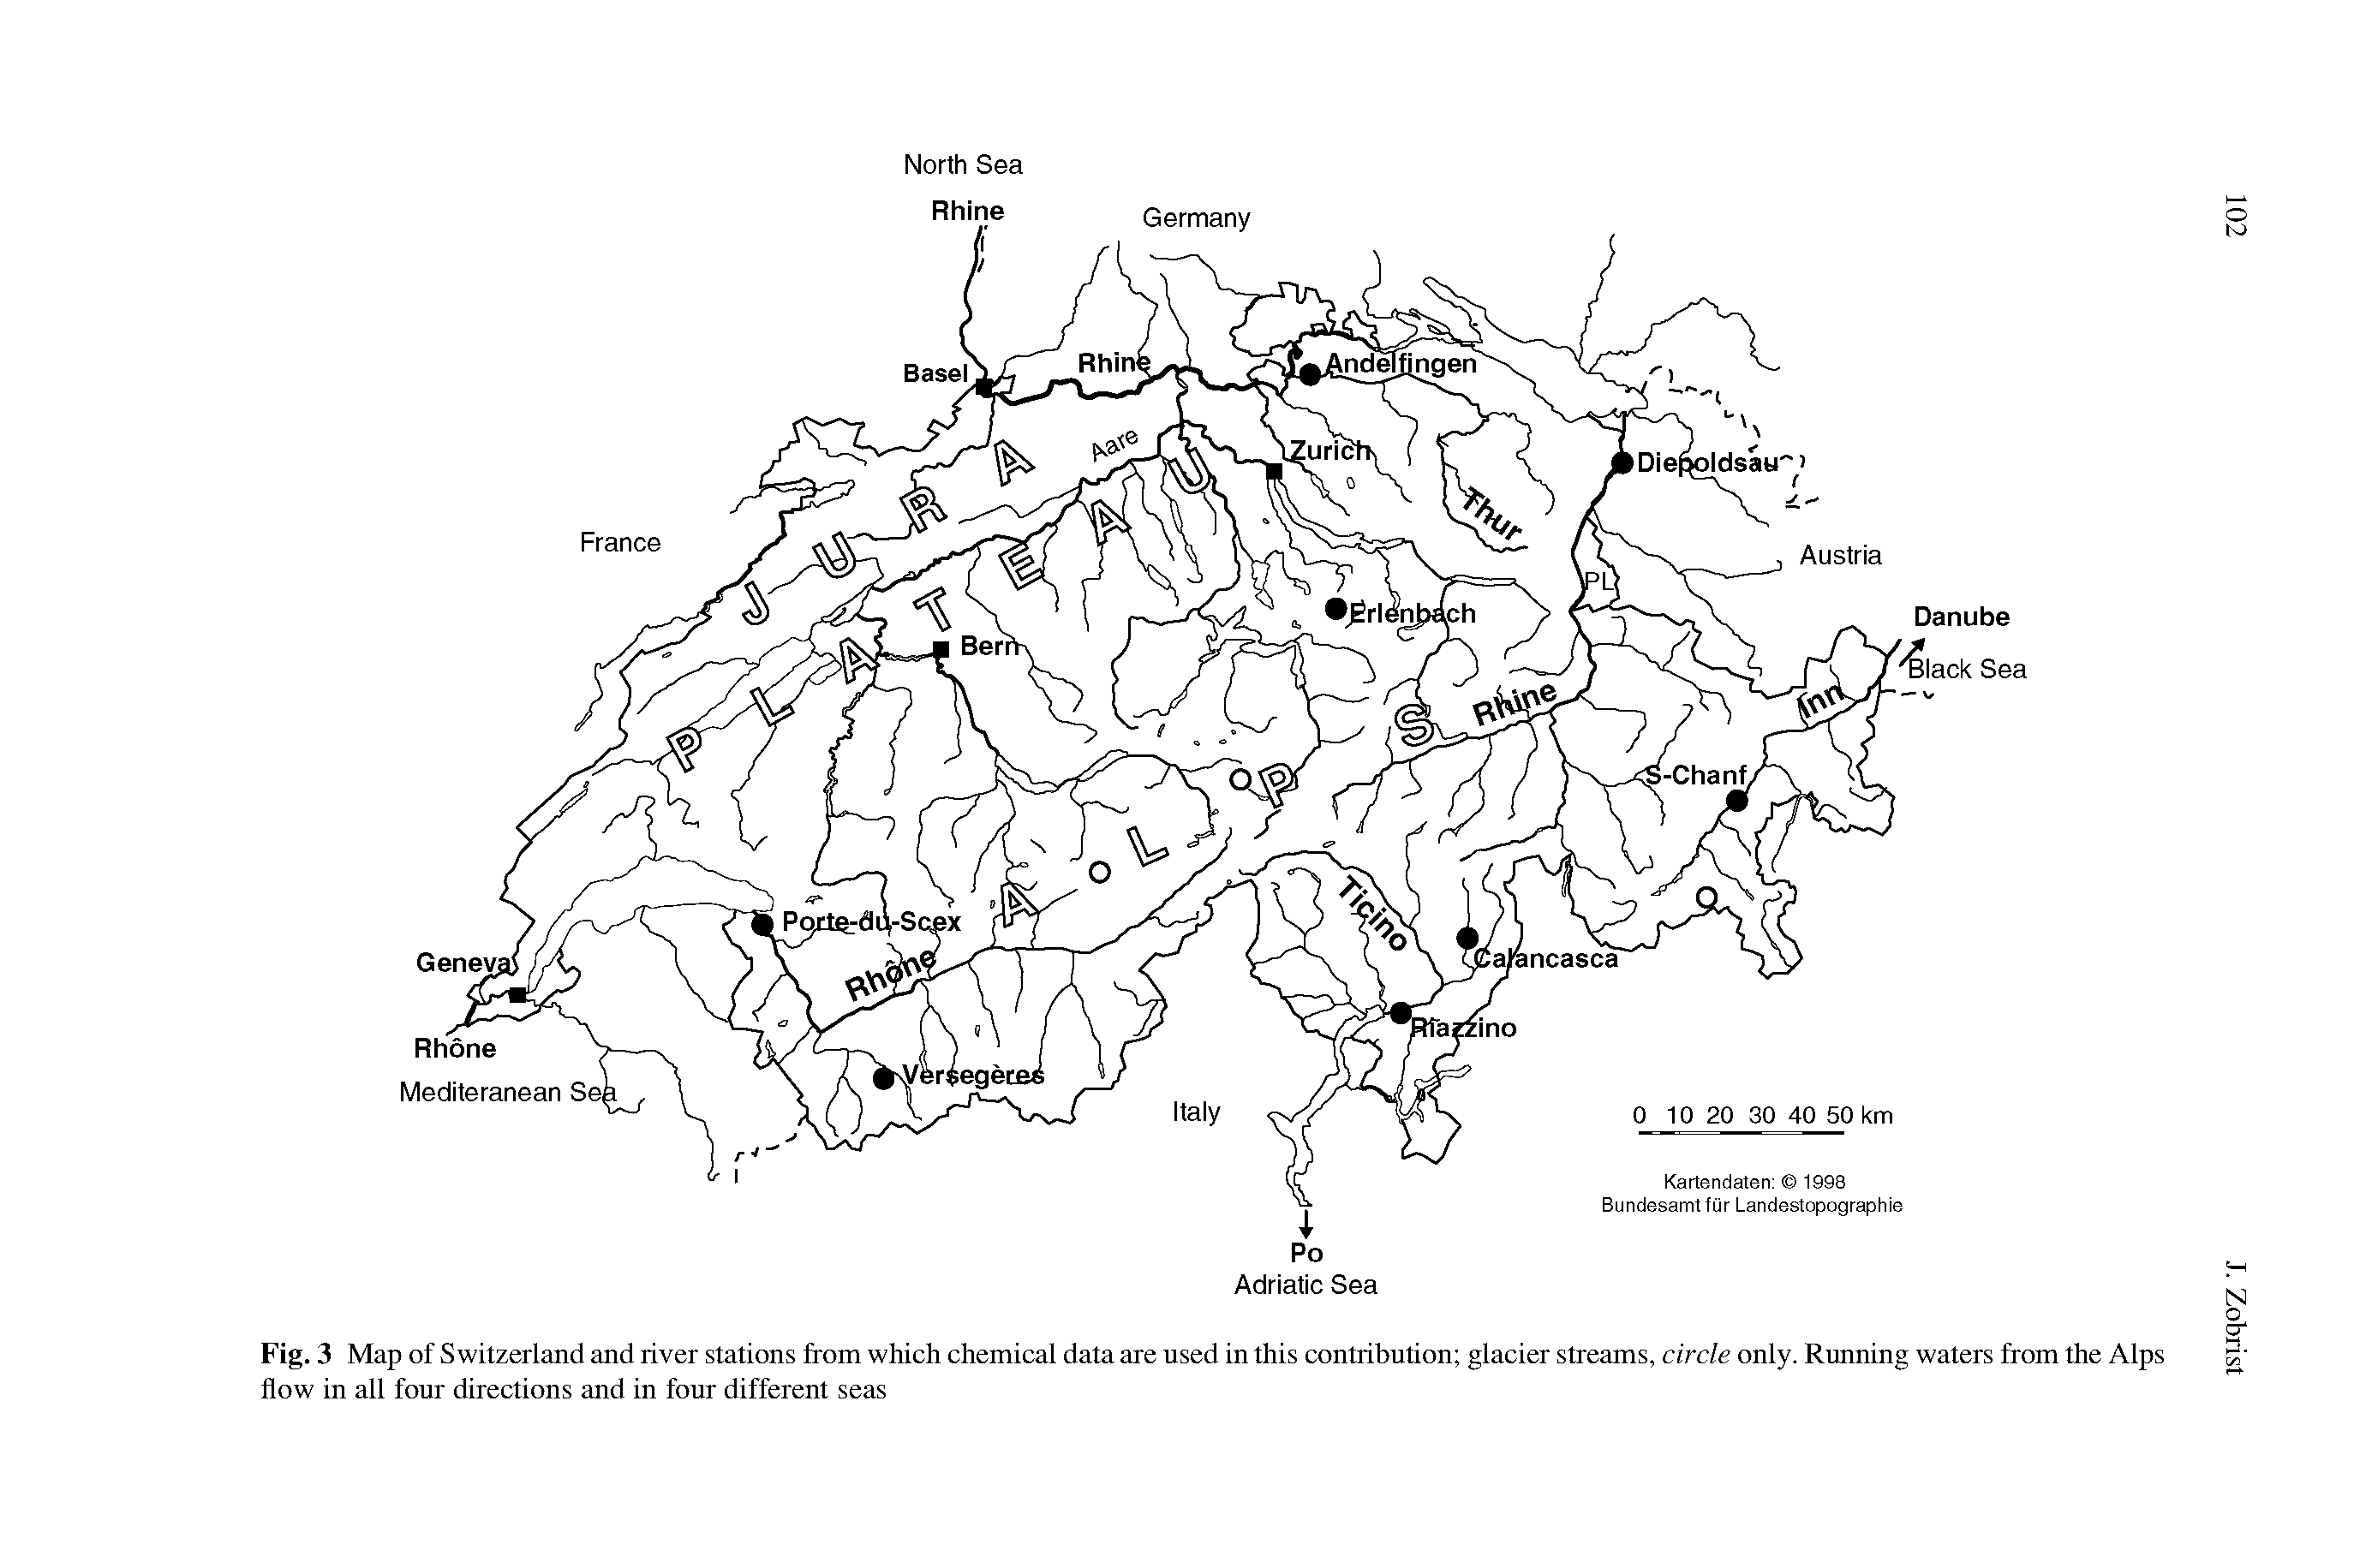 Fig. 3 Map of Switzerland and river stations from which chemical data are used in this contribution glacier streams, circle only. Running waters from the Alps flow in all four directions and in four different seas...